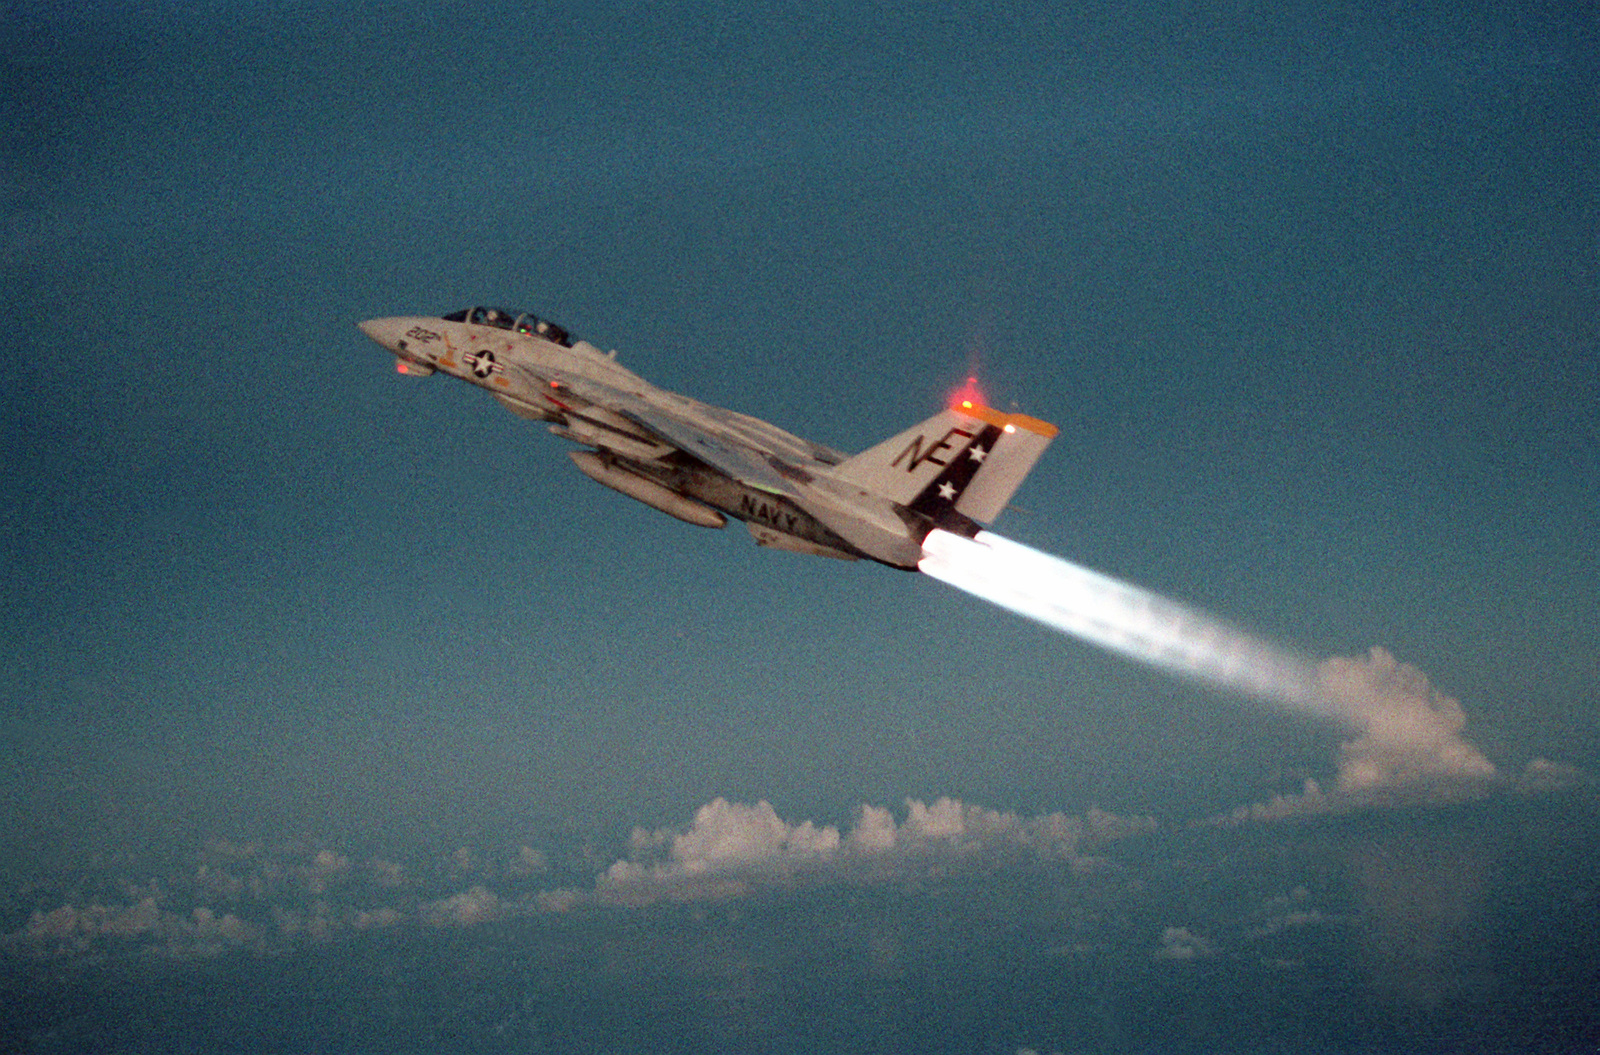 a-left-side-view-of-a-fighter-squadron-2-vf-2-f-14a-tomcat-aircraft-ascending-2c1a96-1600.jpg